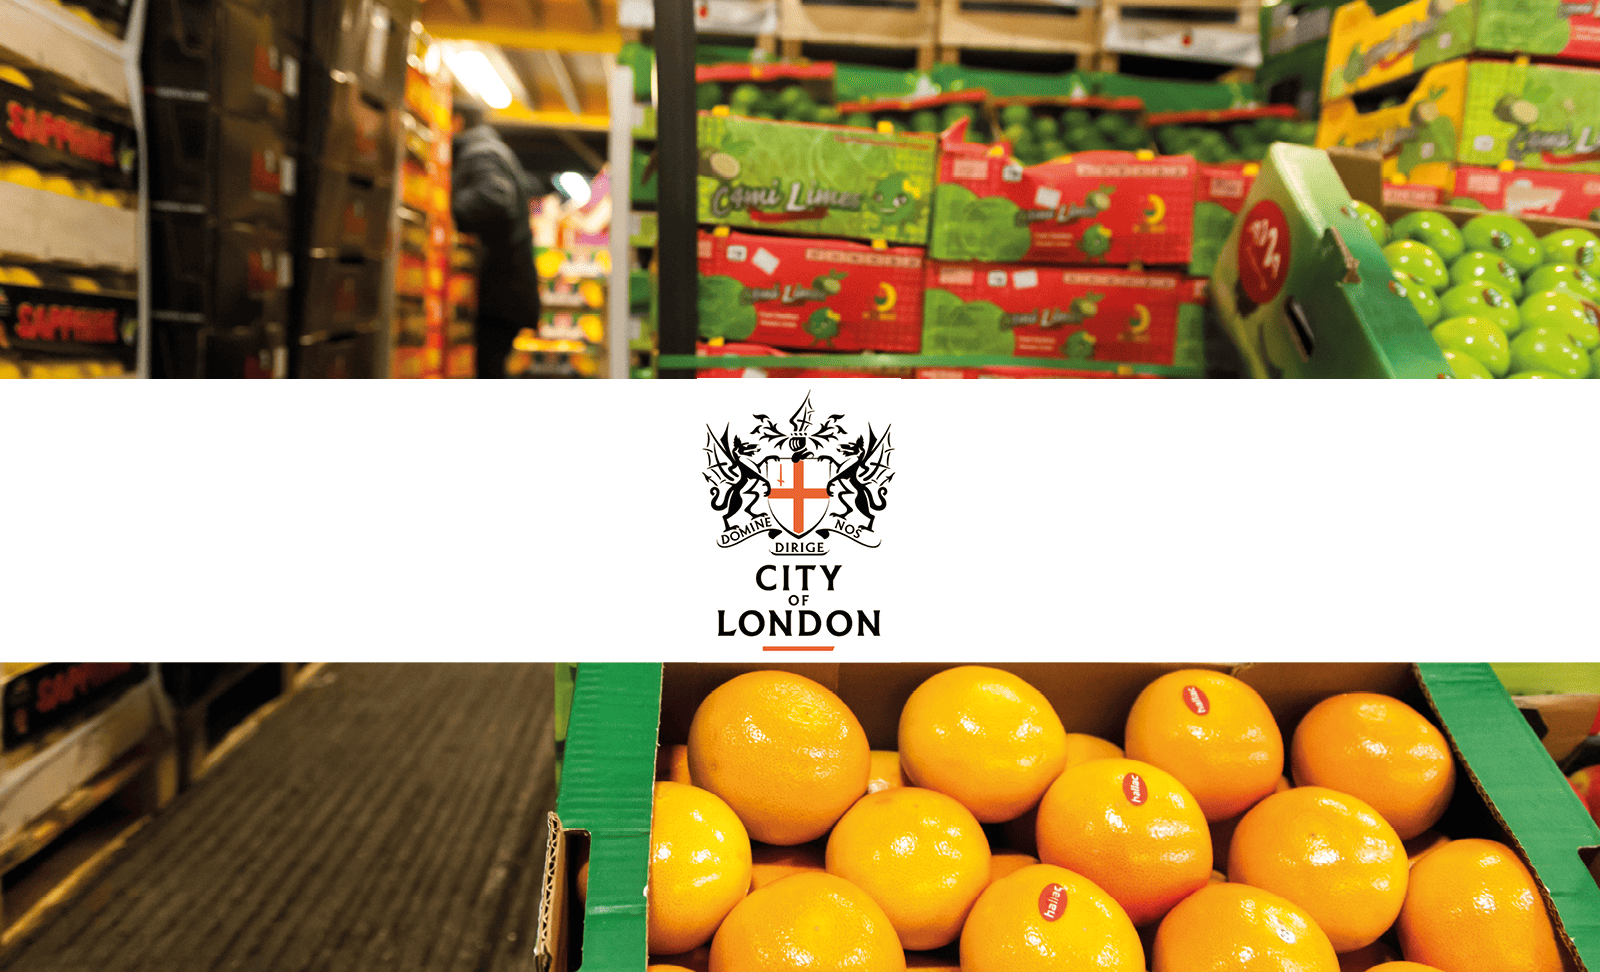 COUNTRYSTYLE RECYCLING HELPS TO KEEP LONDON’S LARGEST FOOD MARKET OPERATING DURING THE CORONAVIRUS CRISIS